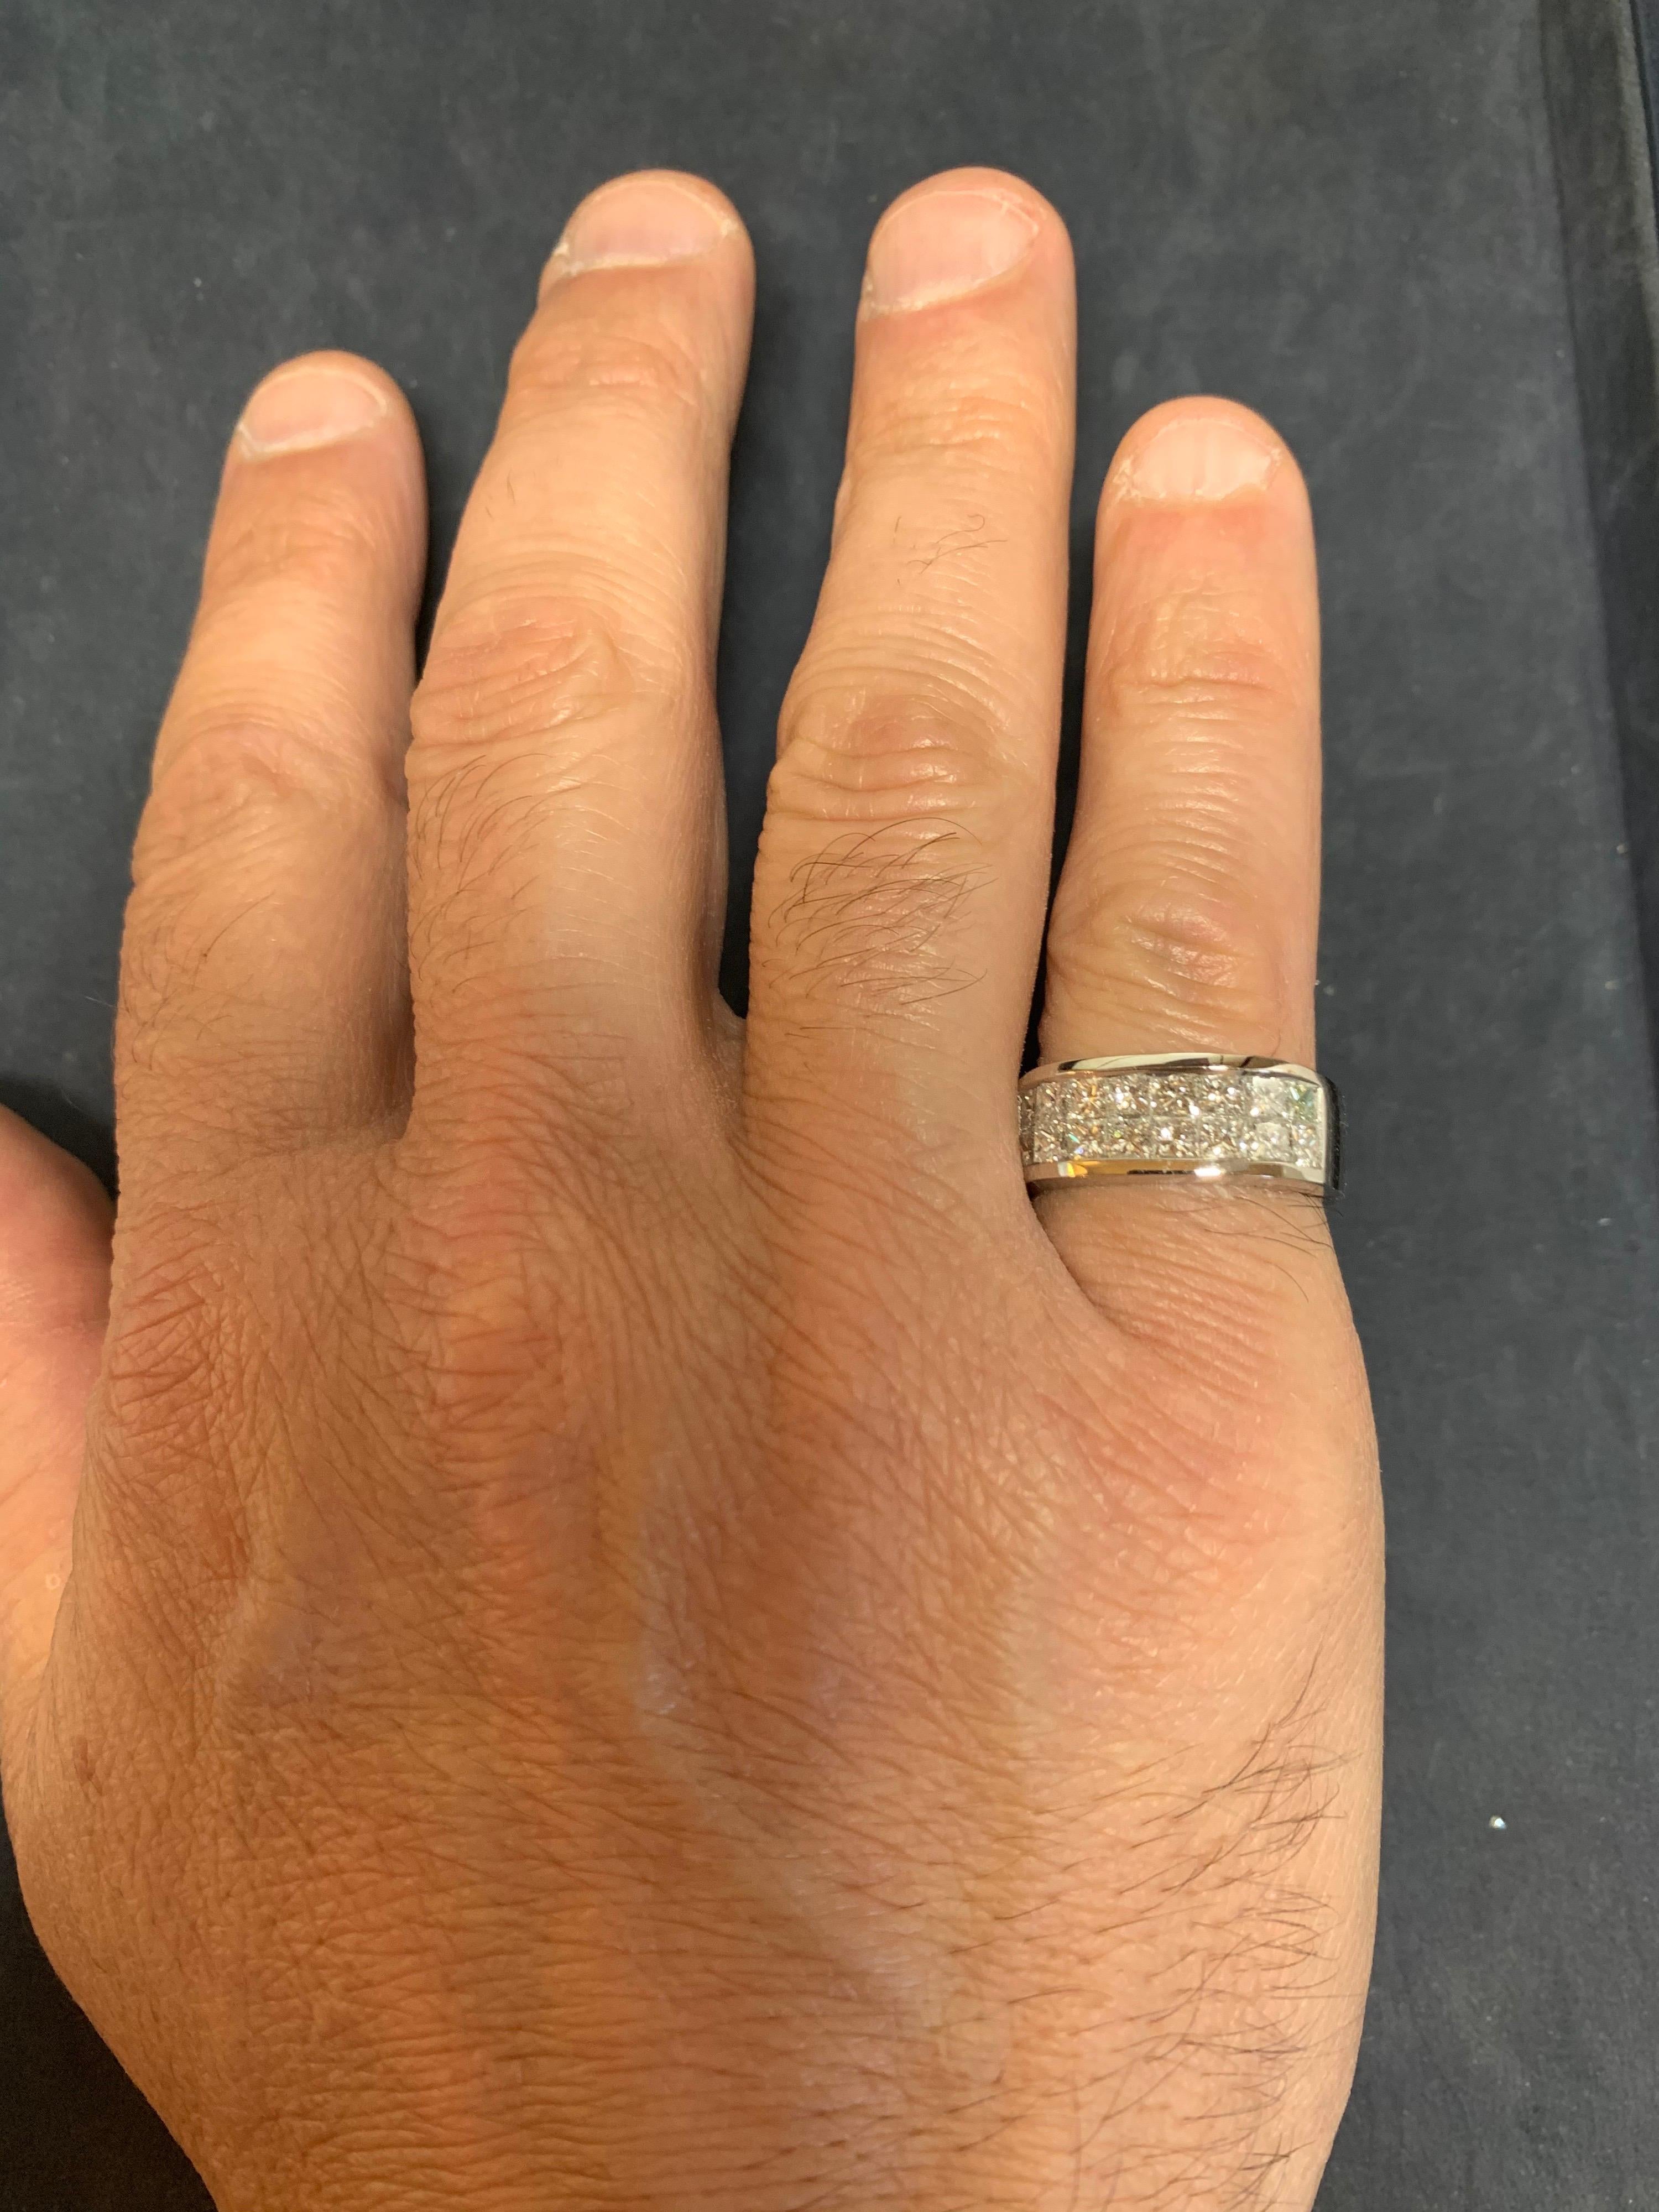 Modern 18k White Gold Unisex 3 Carat Natural Princess Cut Diamond Ring. 

The 16 diamonds weigh approximately 3 carats, measure 3+mm, approx F color and VS clarity.

Ring size is 9.25, ring weight is 12 grams.

Condition is Pre-owned. 